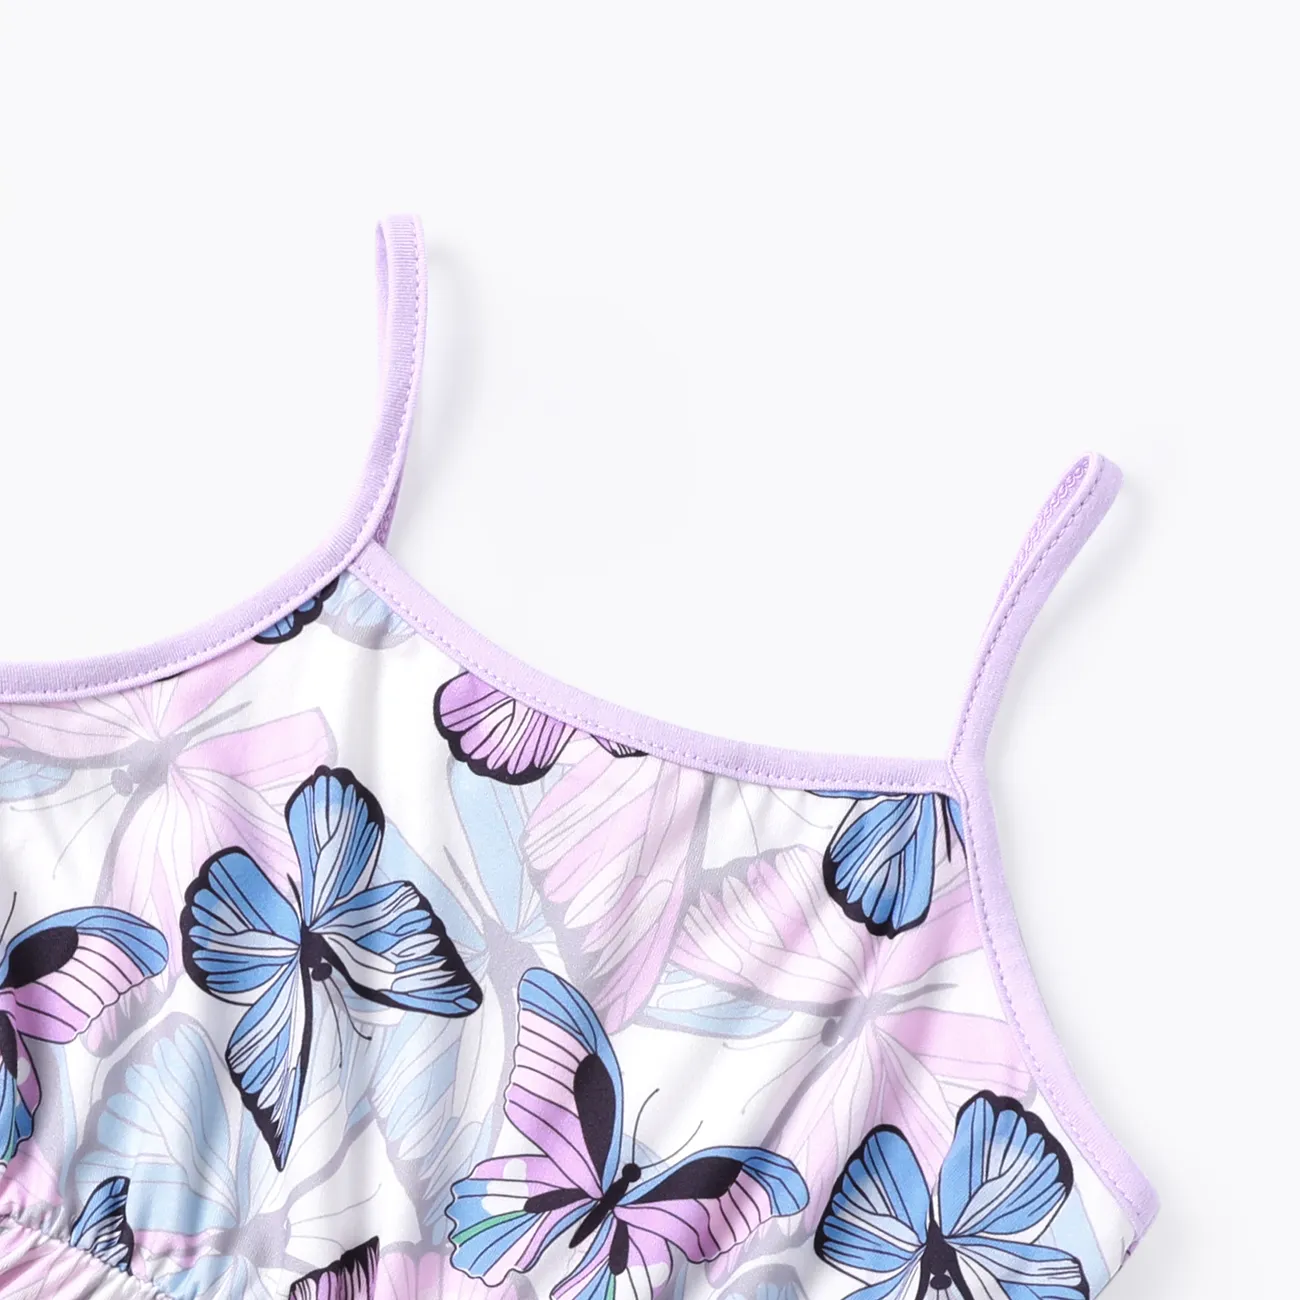 Toddler Girl Butterfly Print Cami Rompers Light Purple big image 1